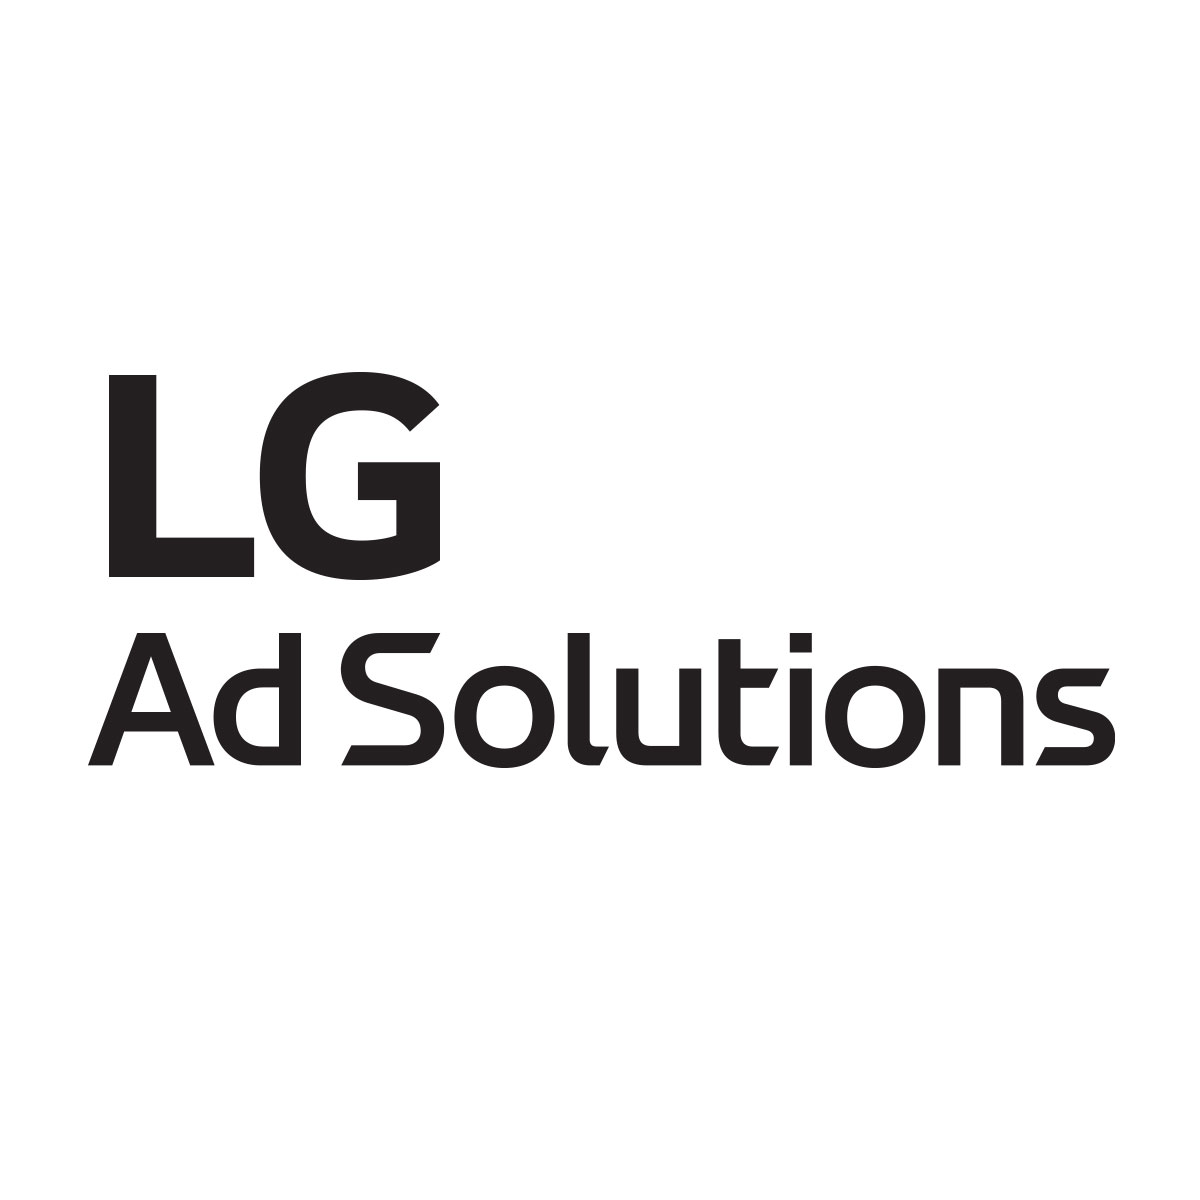 LG Ads Solutions - Empowering Brands with Measurable Results - CTV